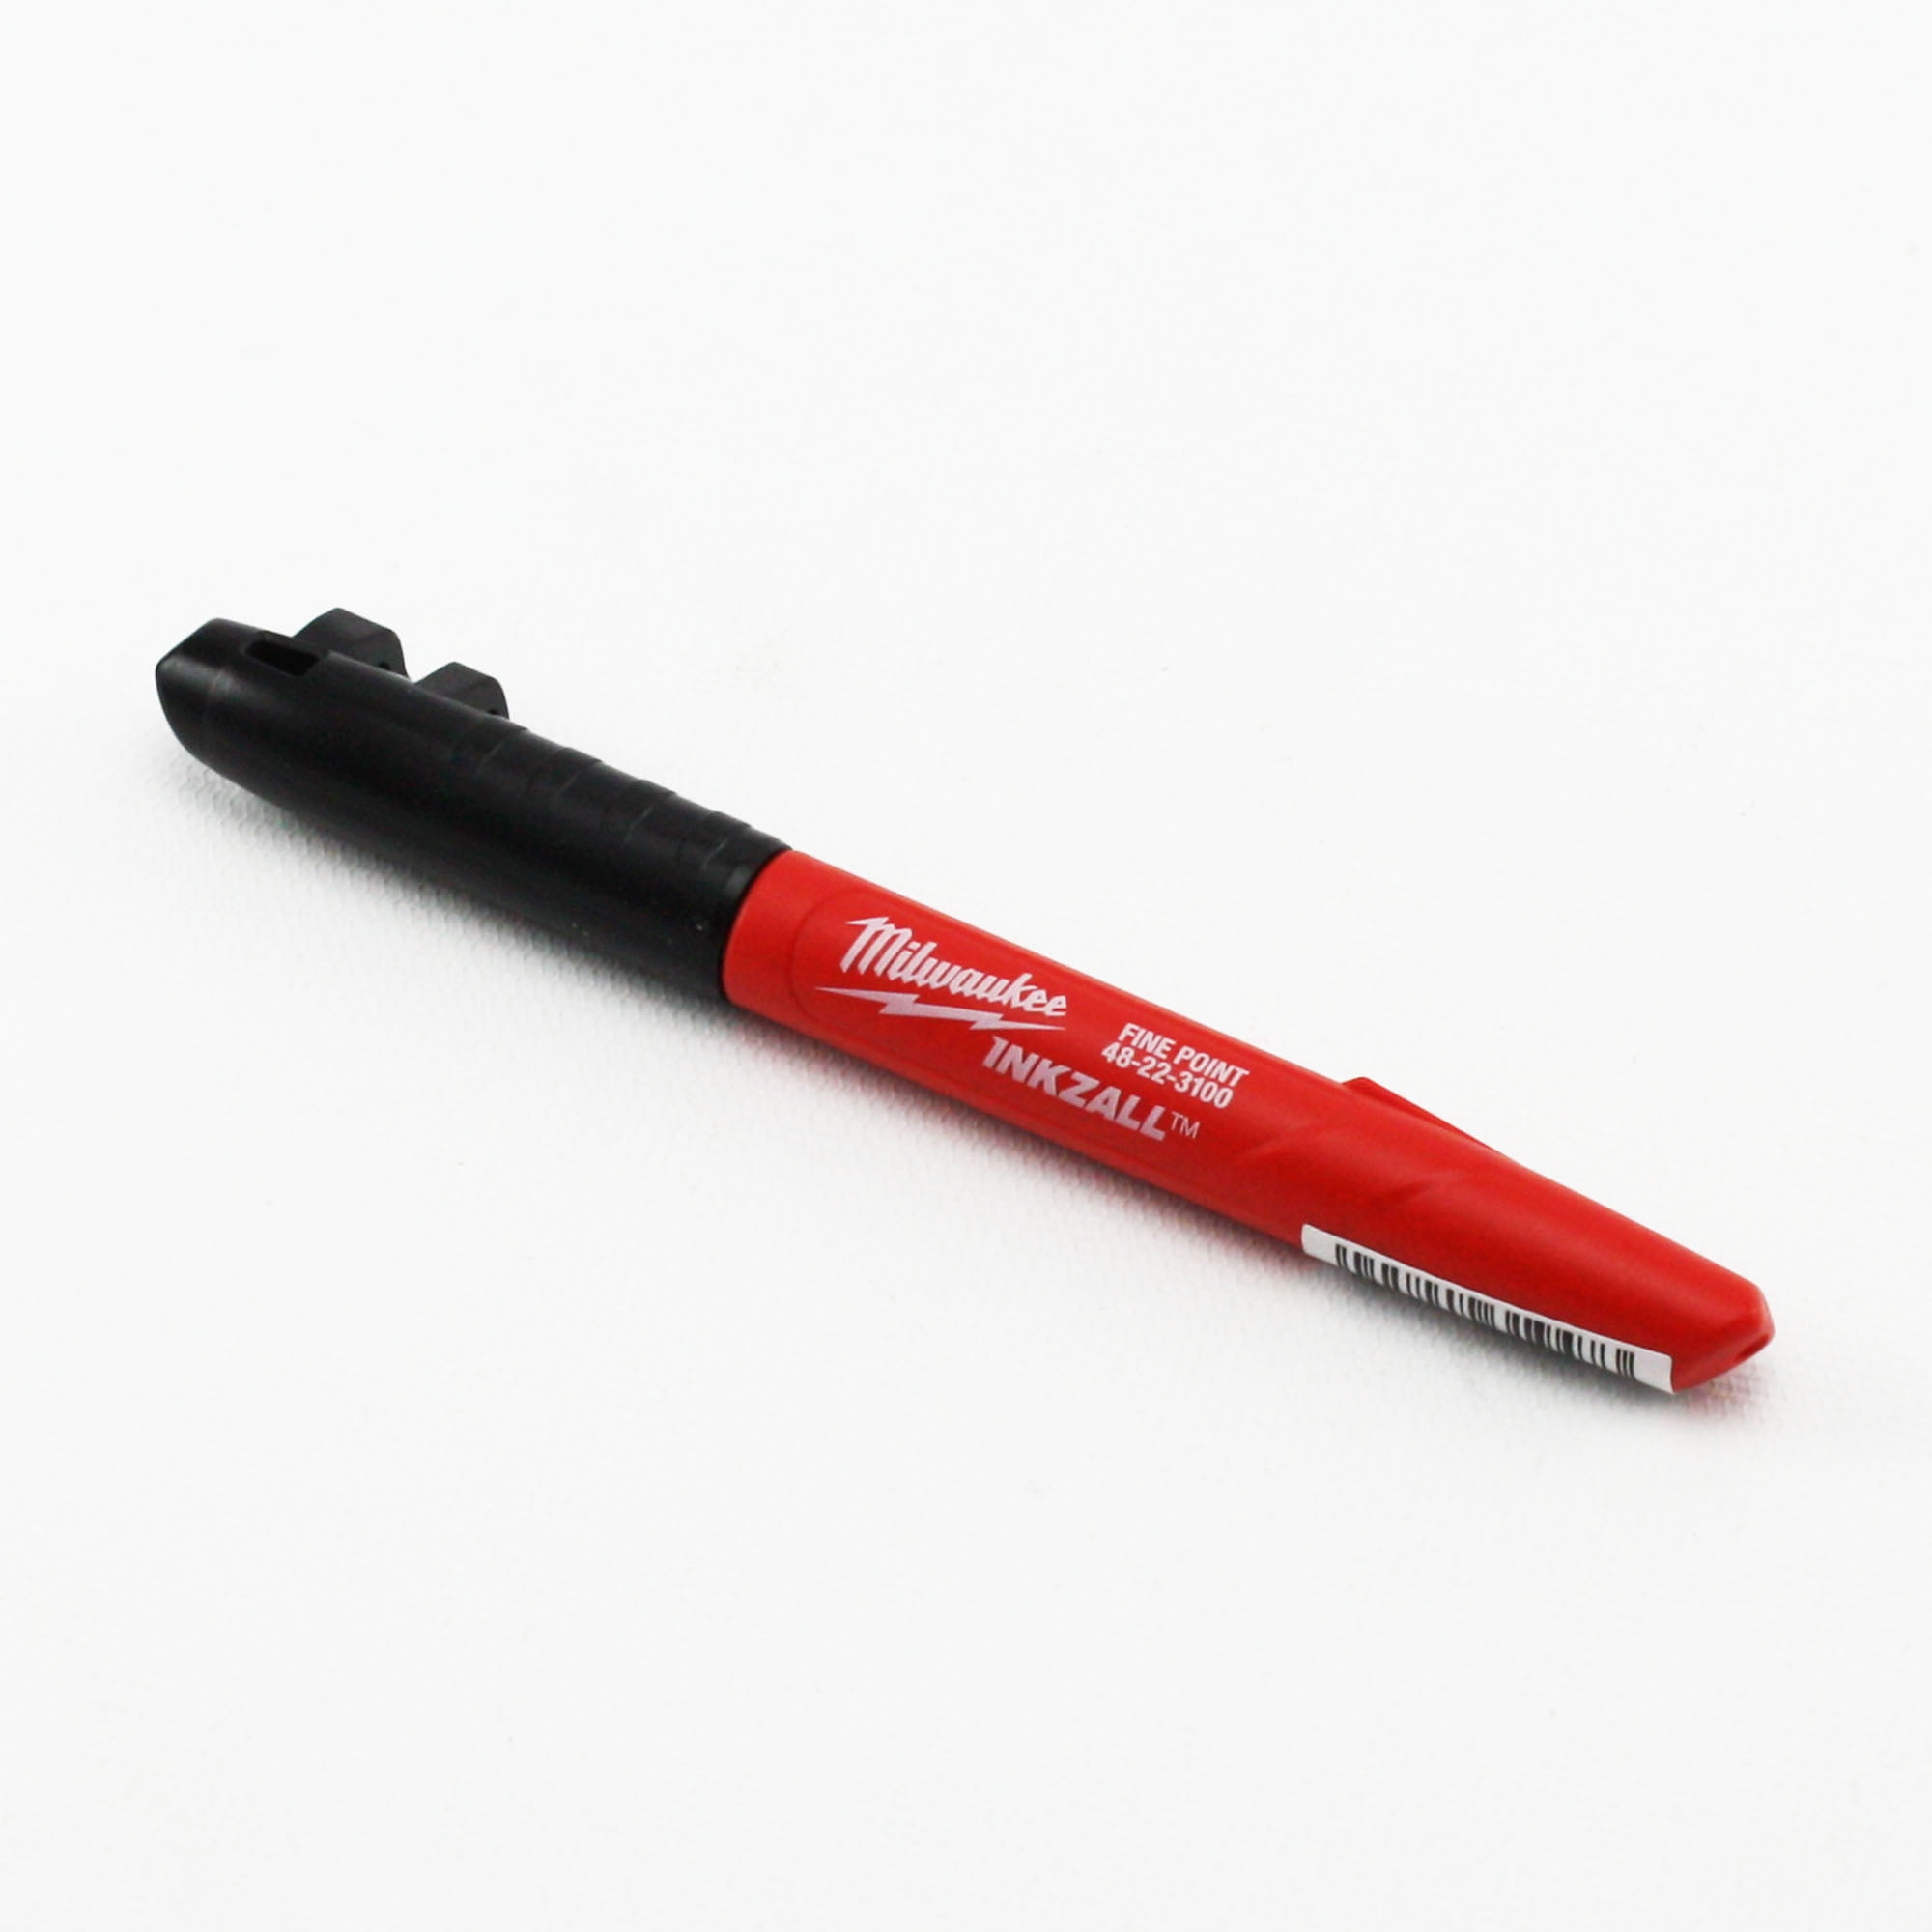 Milwaukee Inkzall Markers Review - Pro Tool Reviews